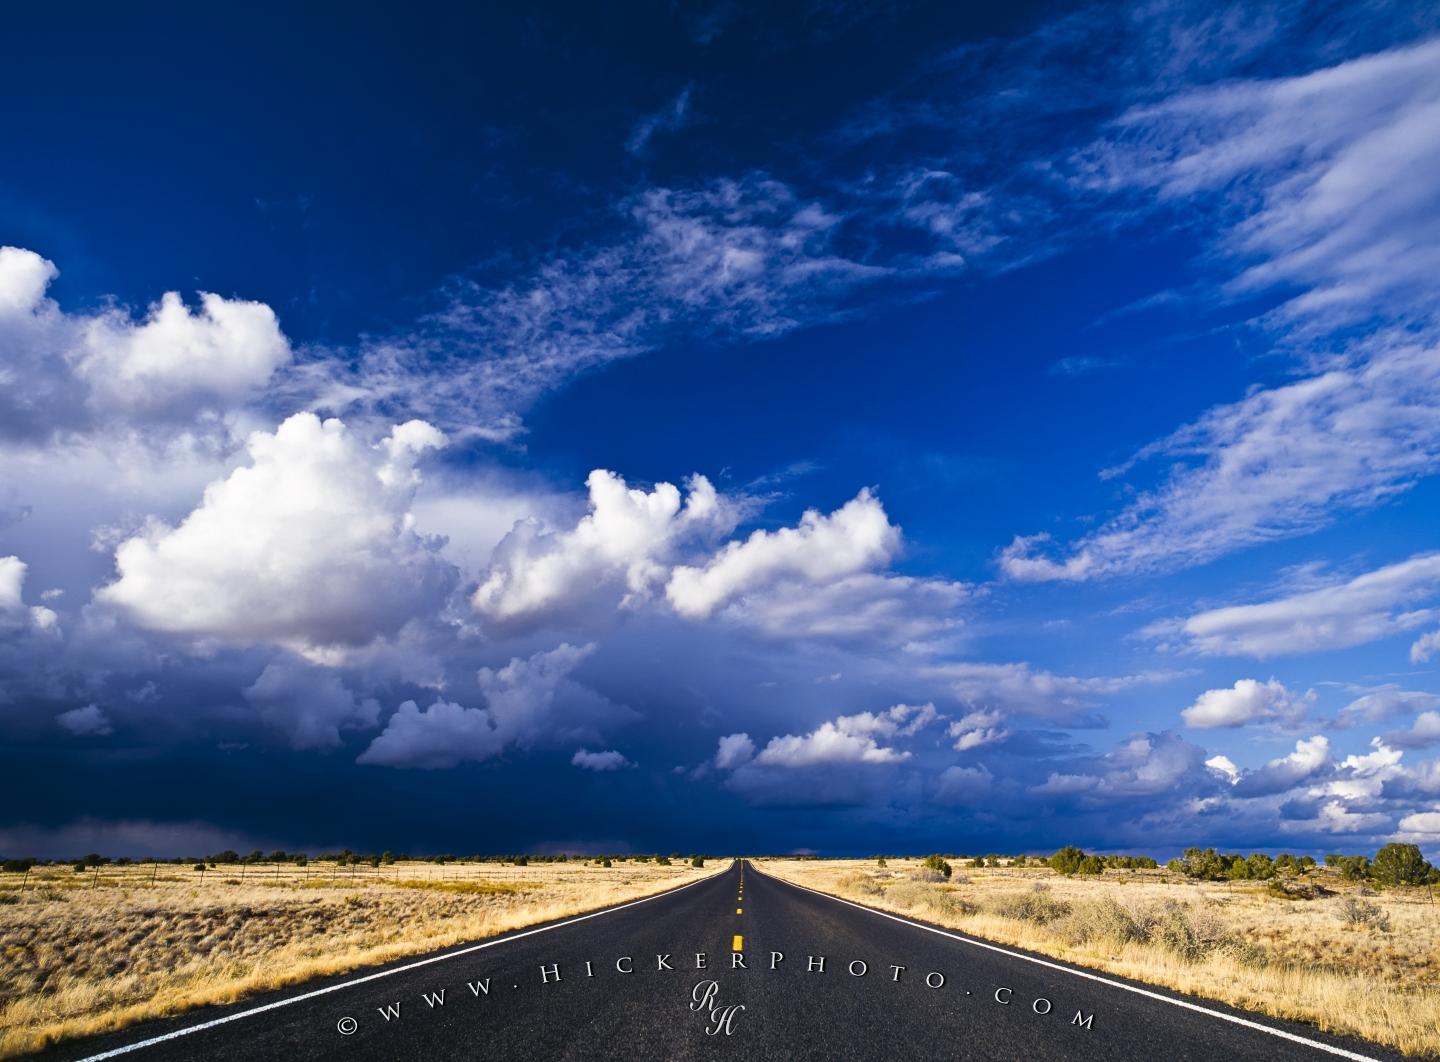 Puter Background A Classic Desert Road Photo In New Mexico Of